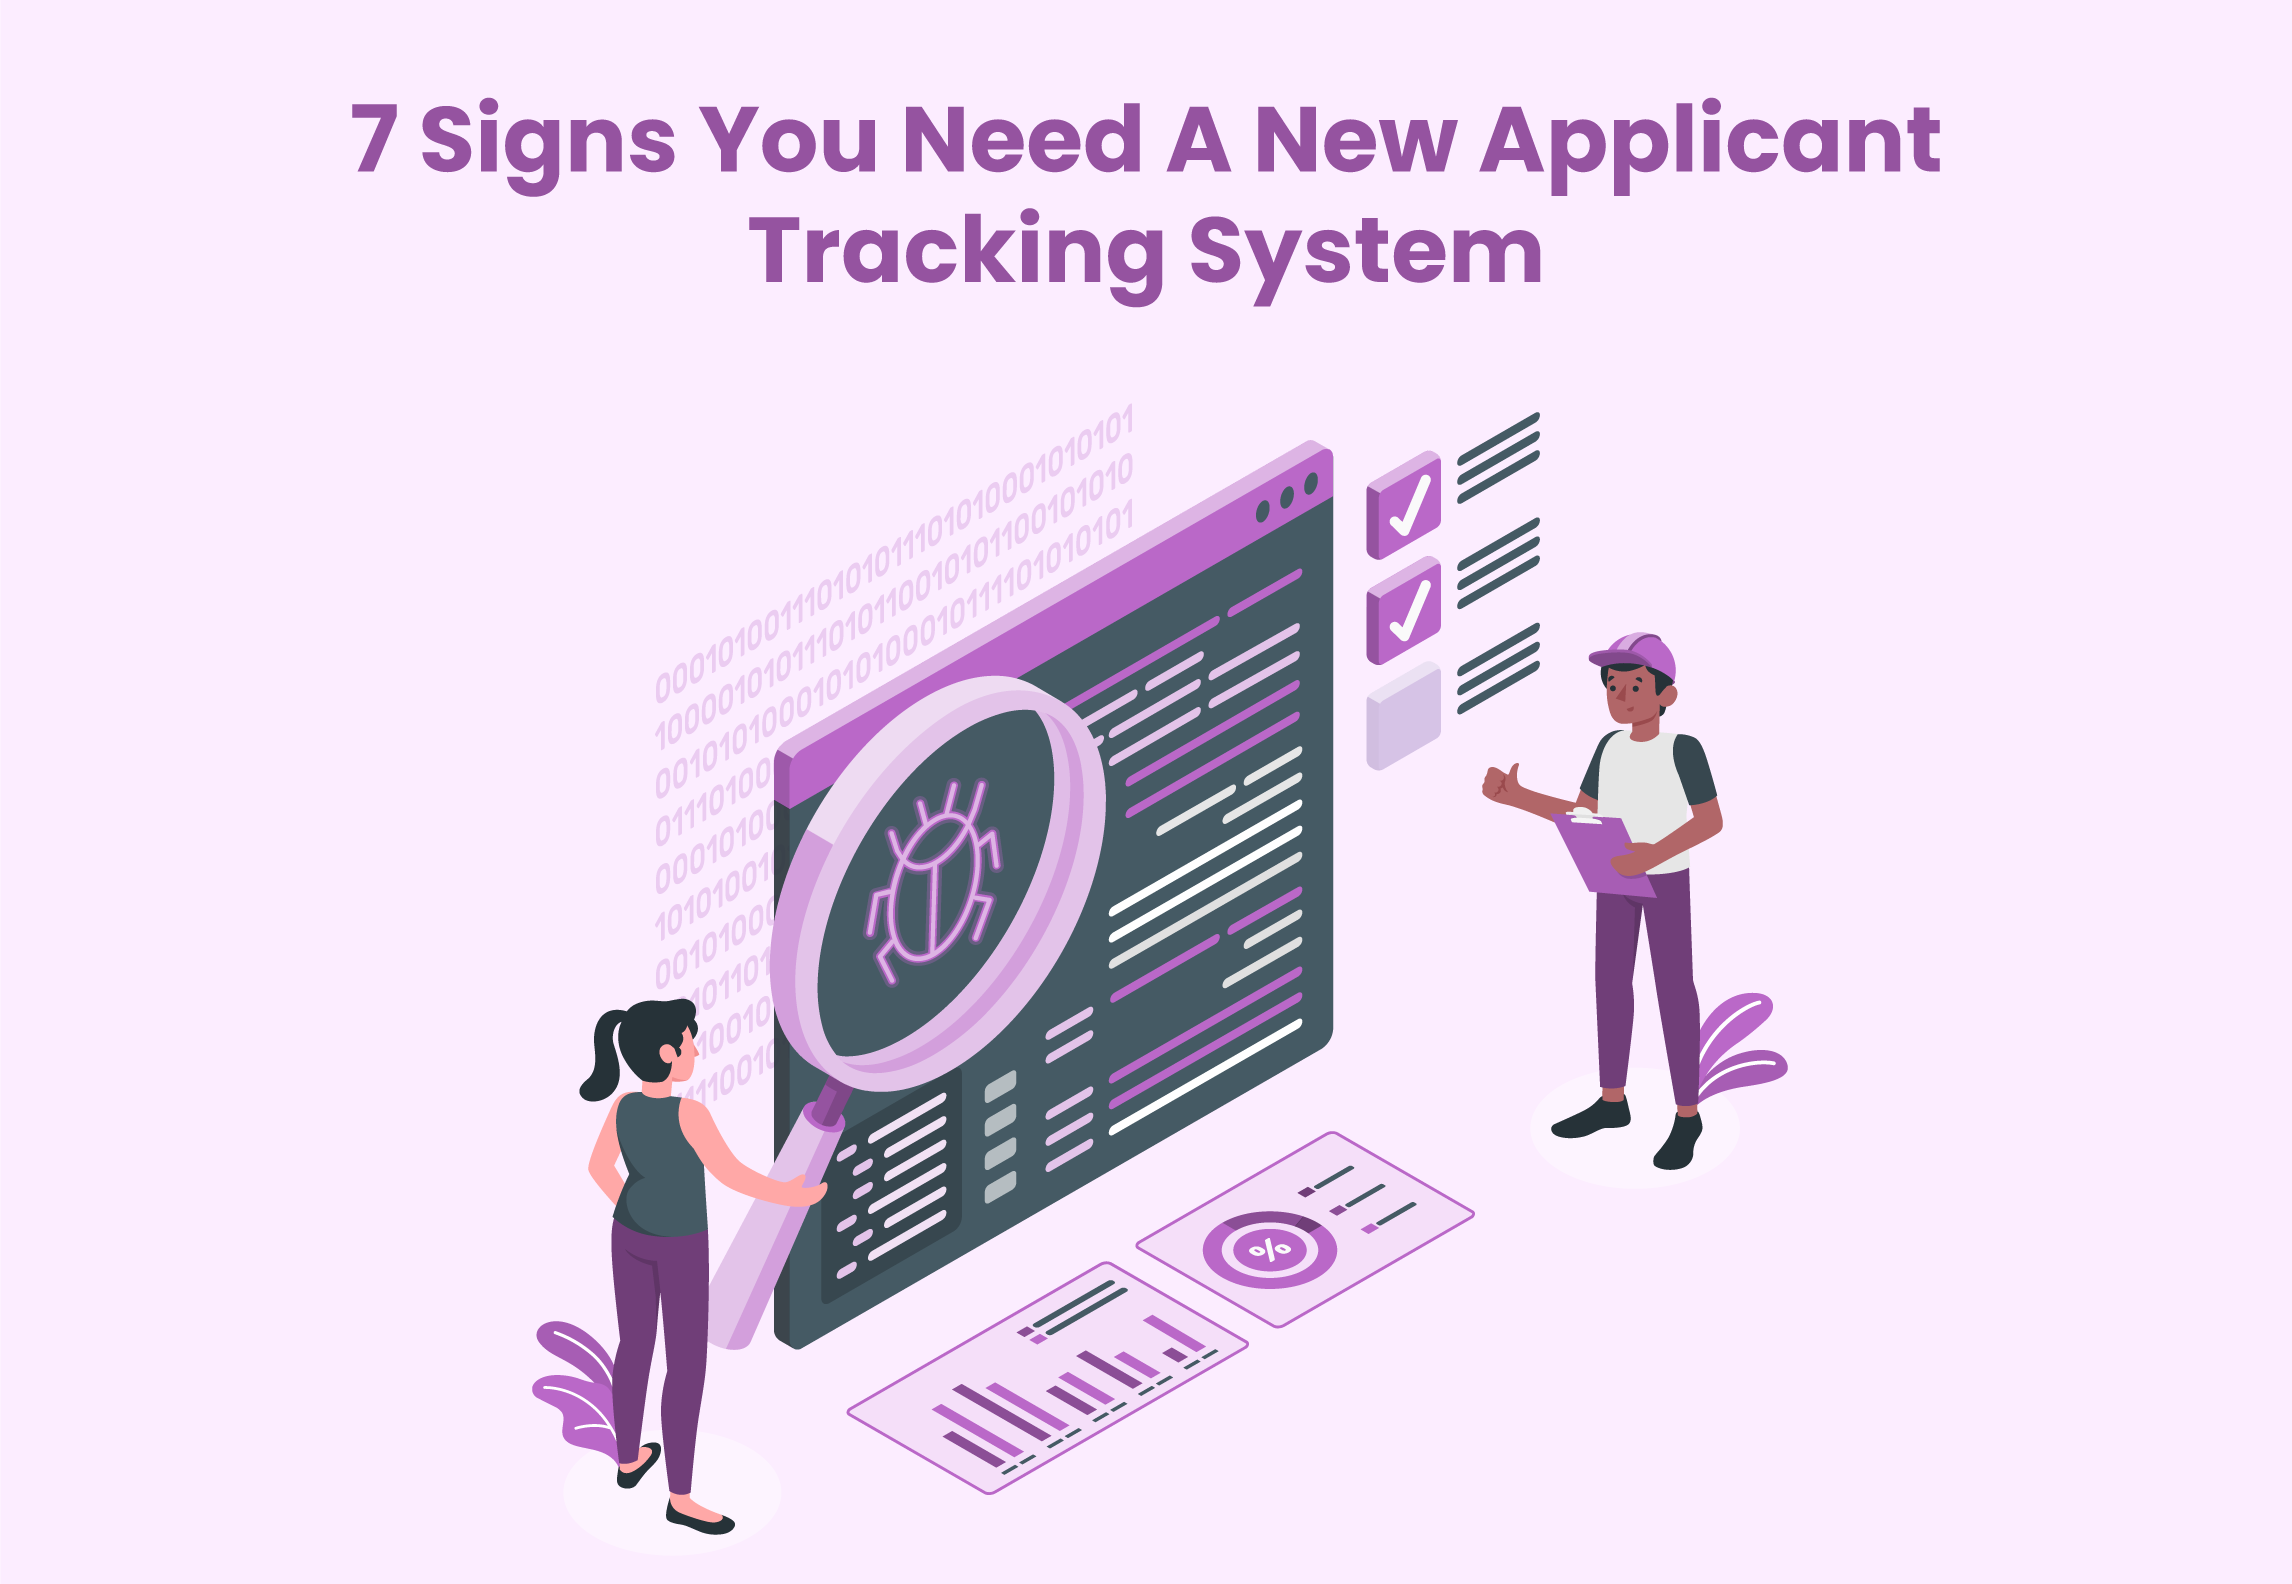 7 Signs You Need A New Applicant Tracking System